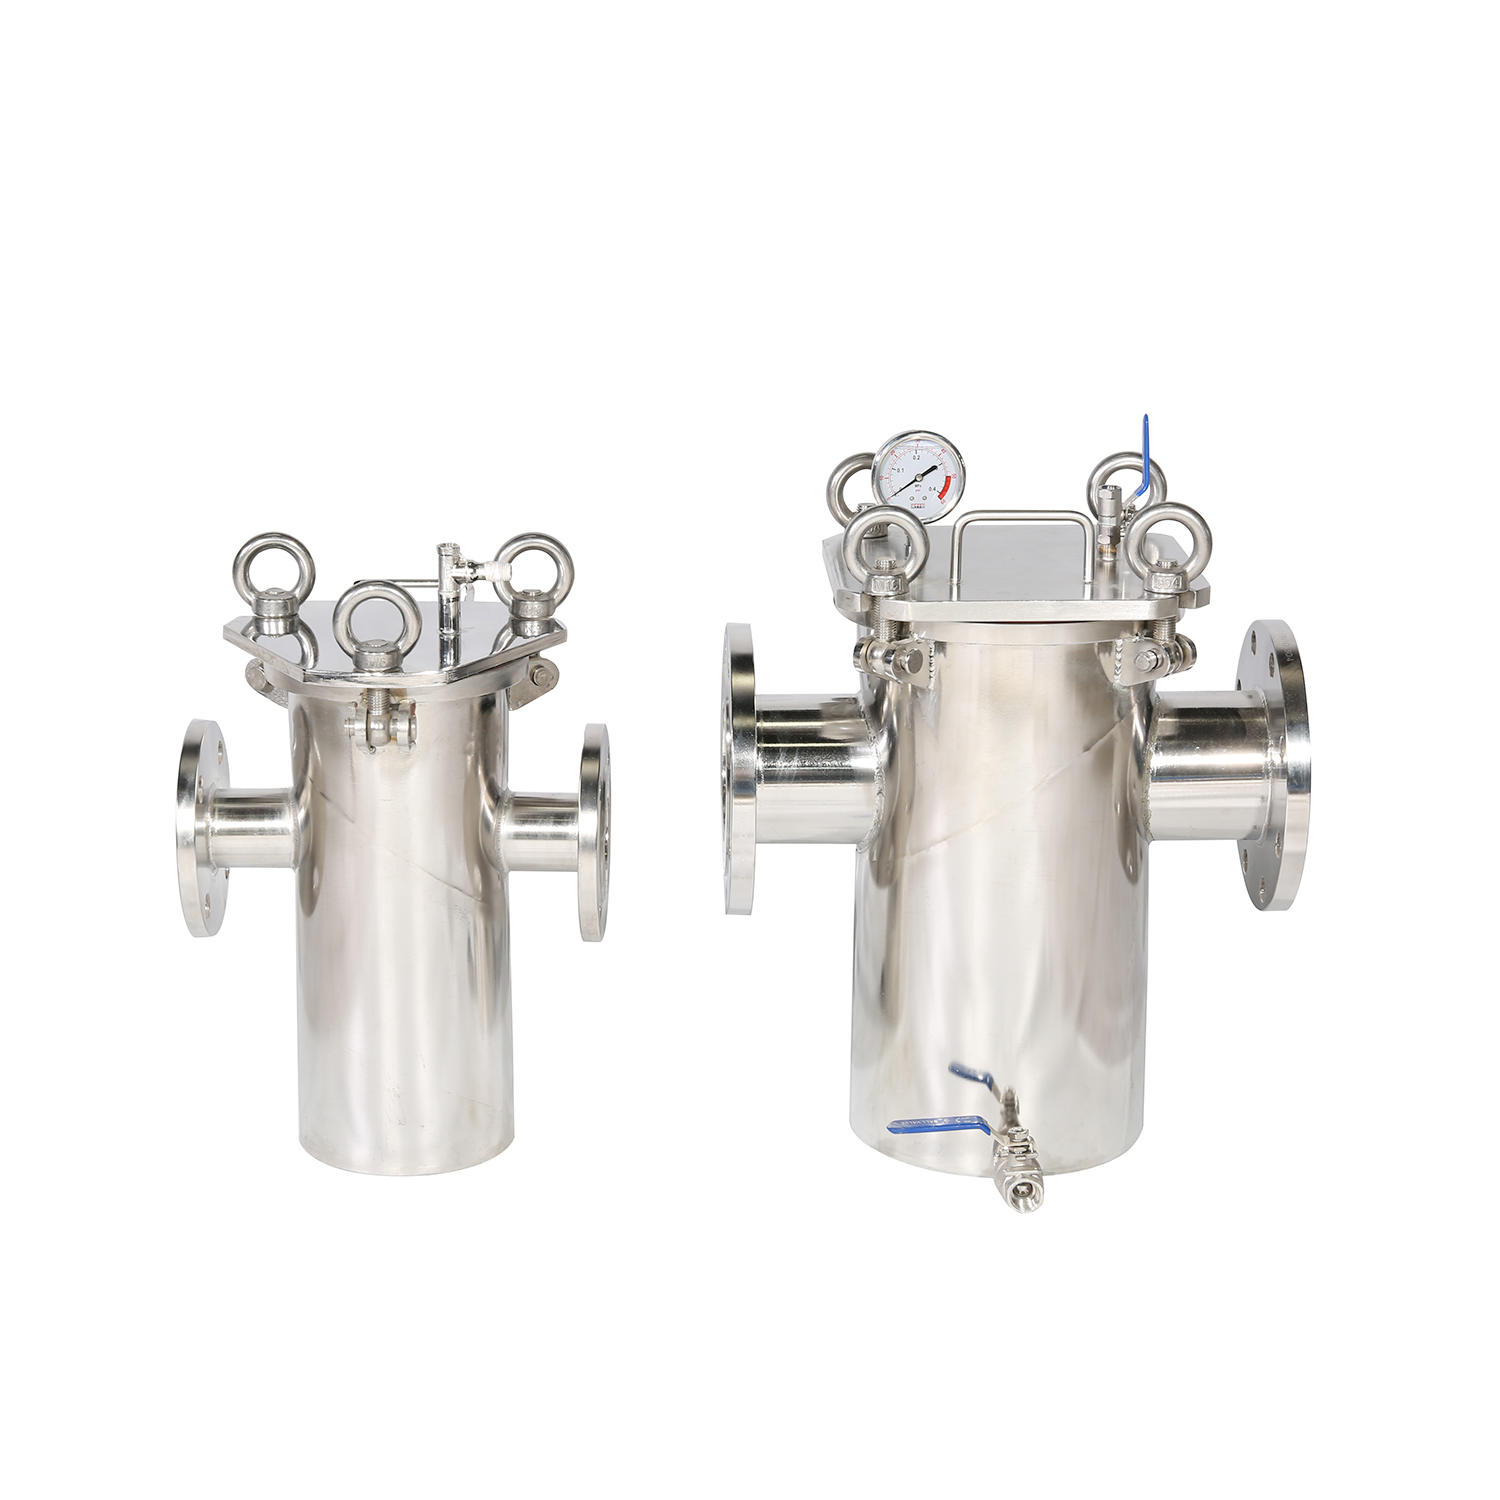 Industrial ss 304 316 316L Stainless Steel Cartridge Filter Housing with 10'' 20'' 30'' 40'' Length